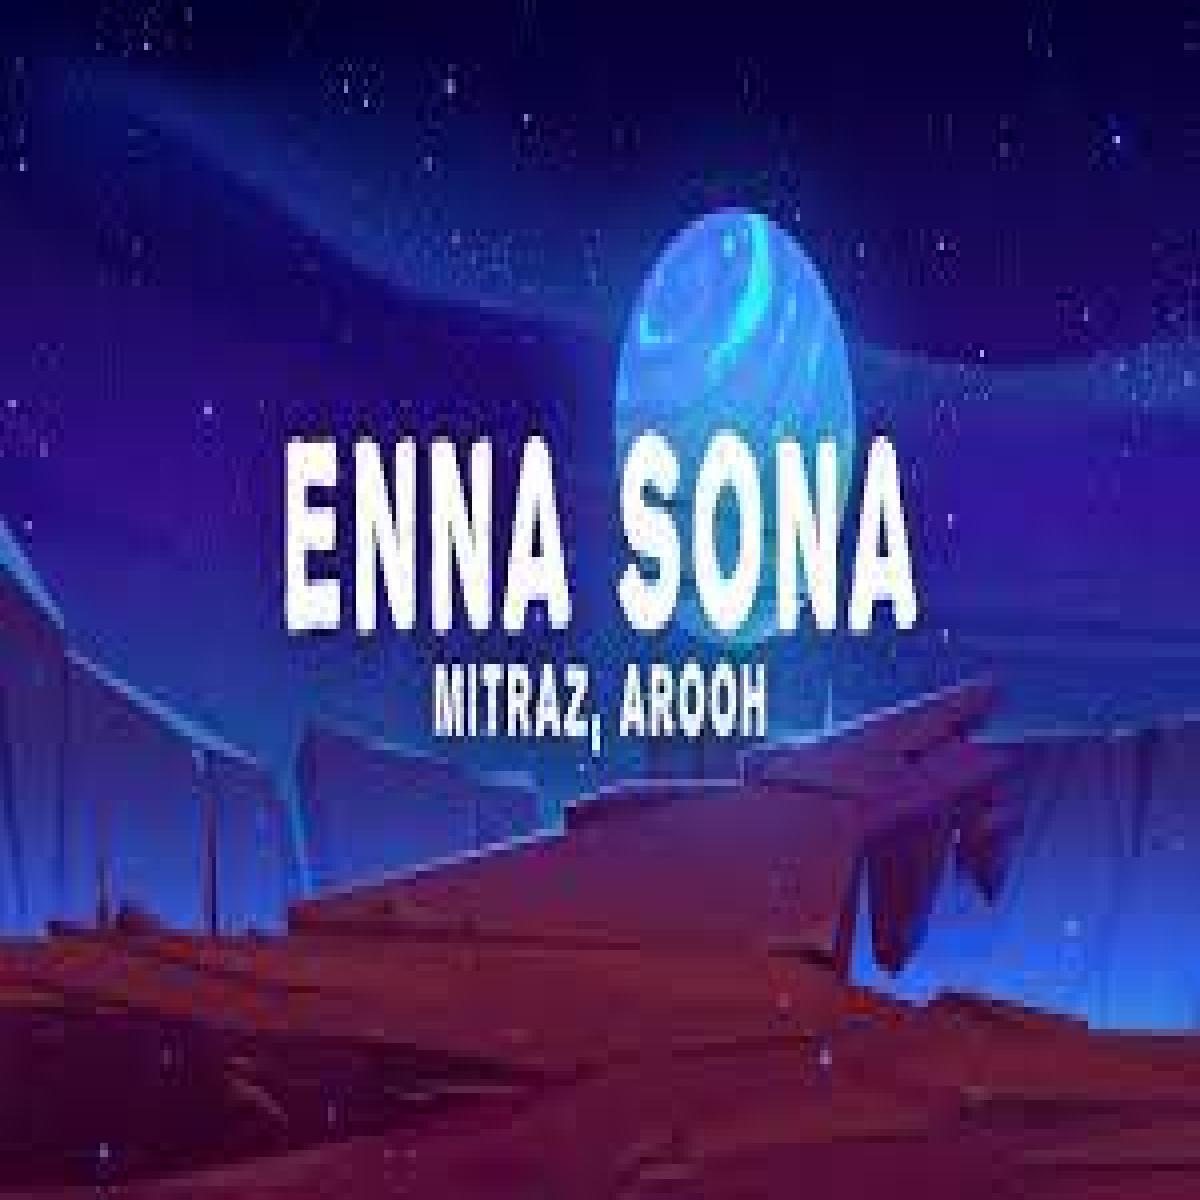 If You Have a Khwahish of a Heeriye, Listen to These Enna Sona Tracks by New Age Artists Mitraz and Arooh